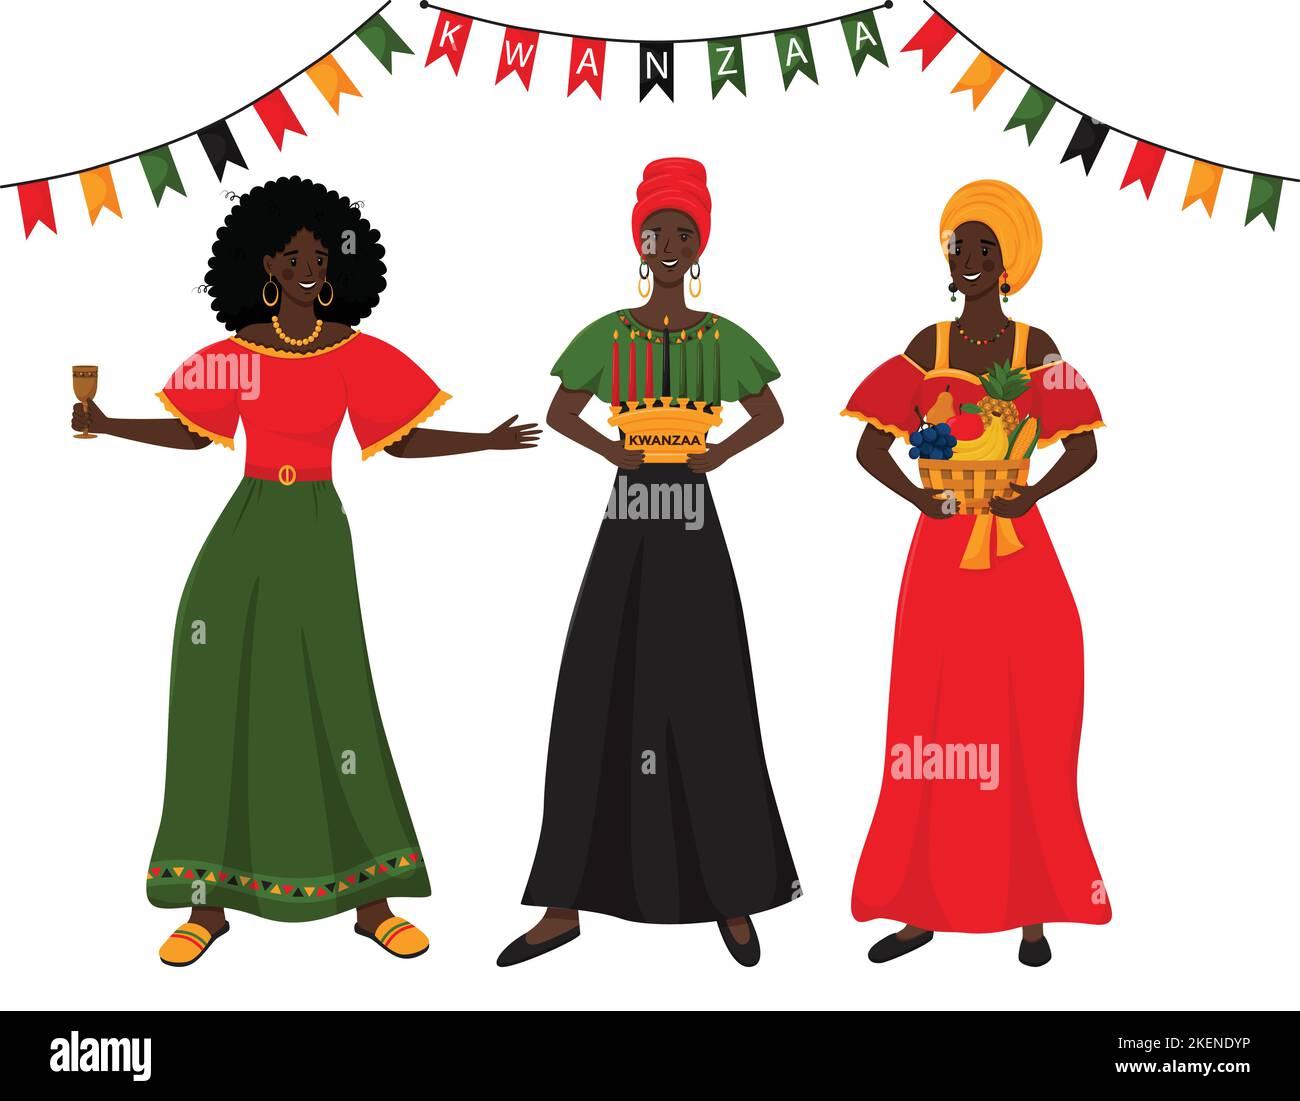 Three young african women holding in their hands traditional symbols of Kwanzaa - Unity Cup - Kikombe Cha Umoja, Basket with fruits - Mazao, Candle ho Stock Vector